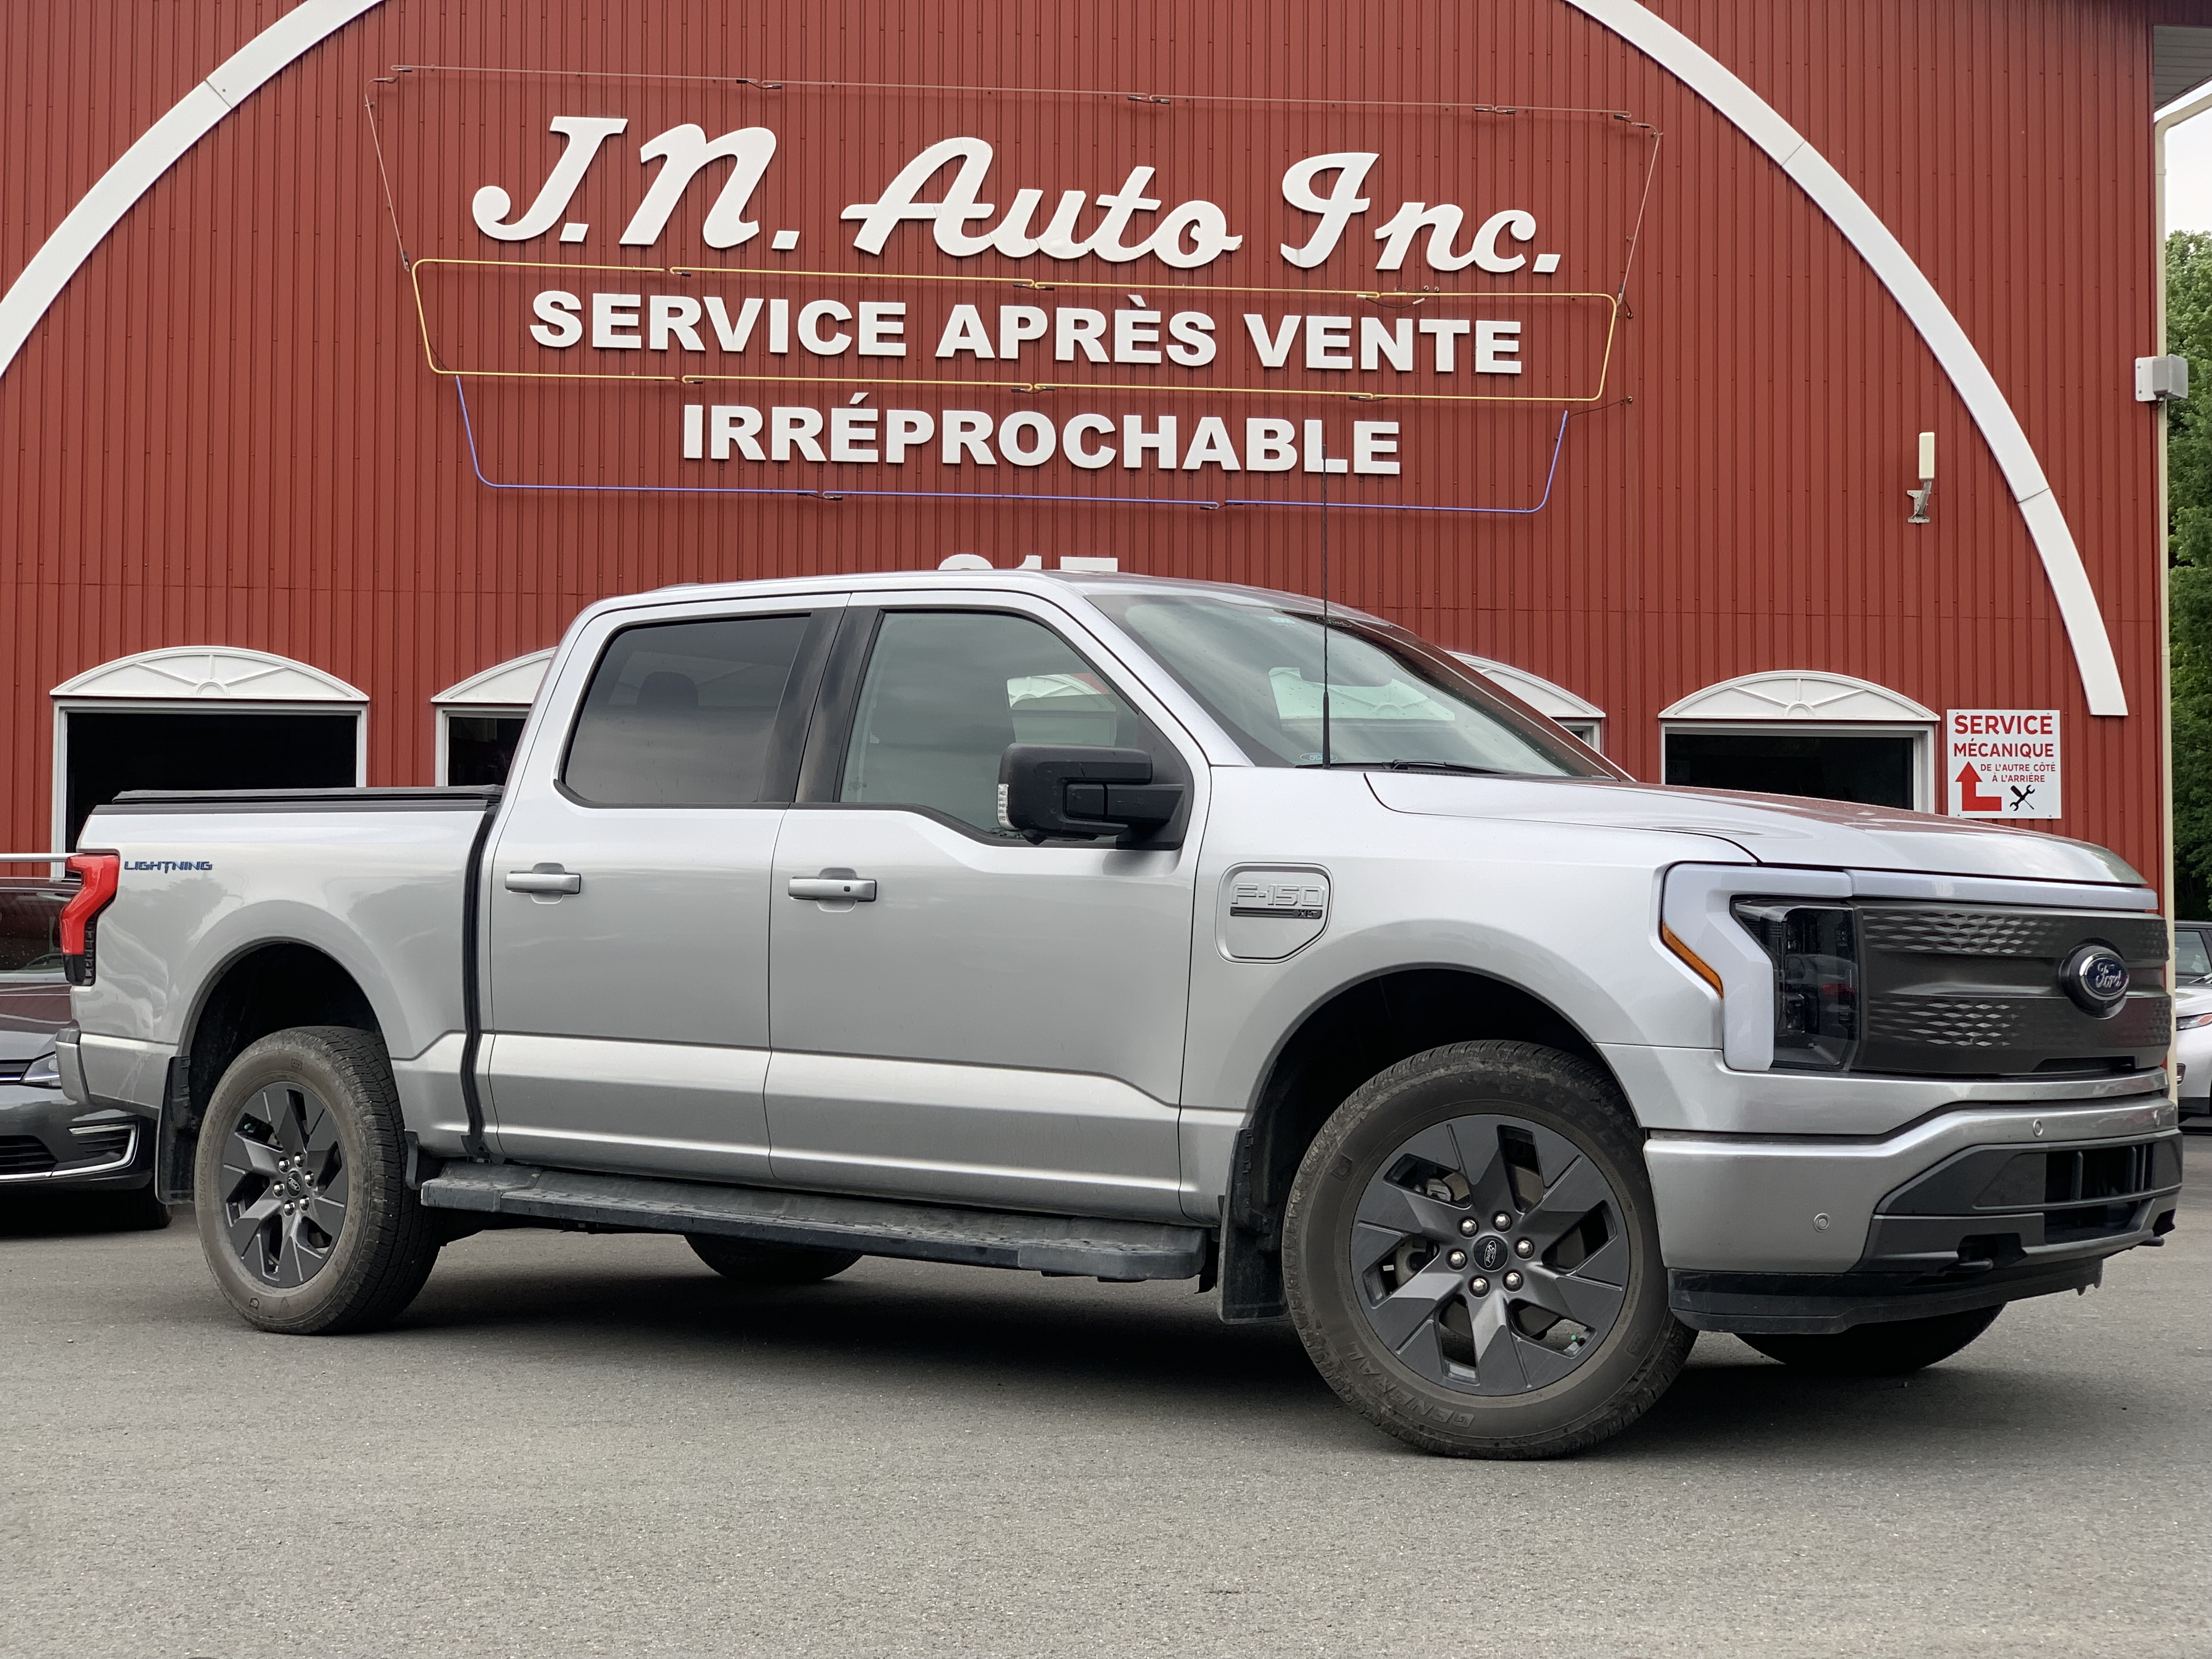 JN auto Ford F-150 LIGHTNING XLT 4x4 98 kwh Gr. remorquage MAX ! Toile enroulable truxedo 2022 8608885 Image principale